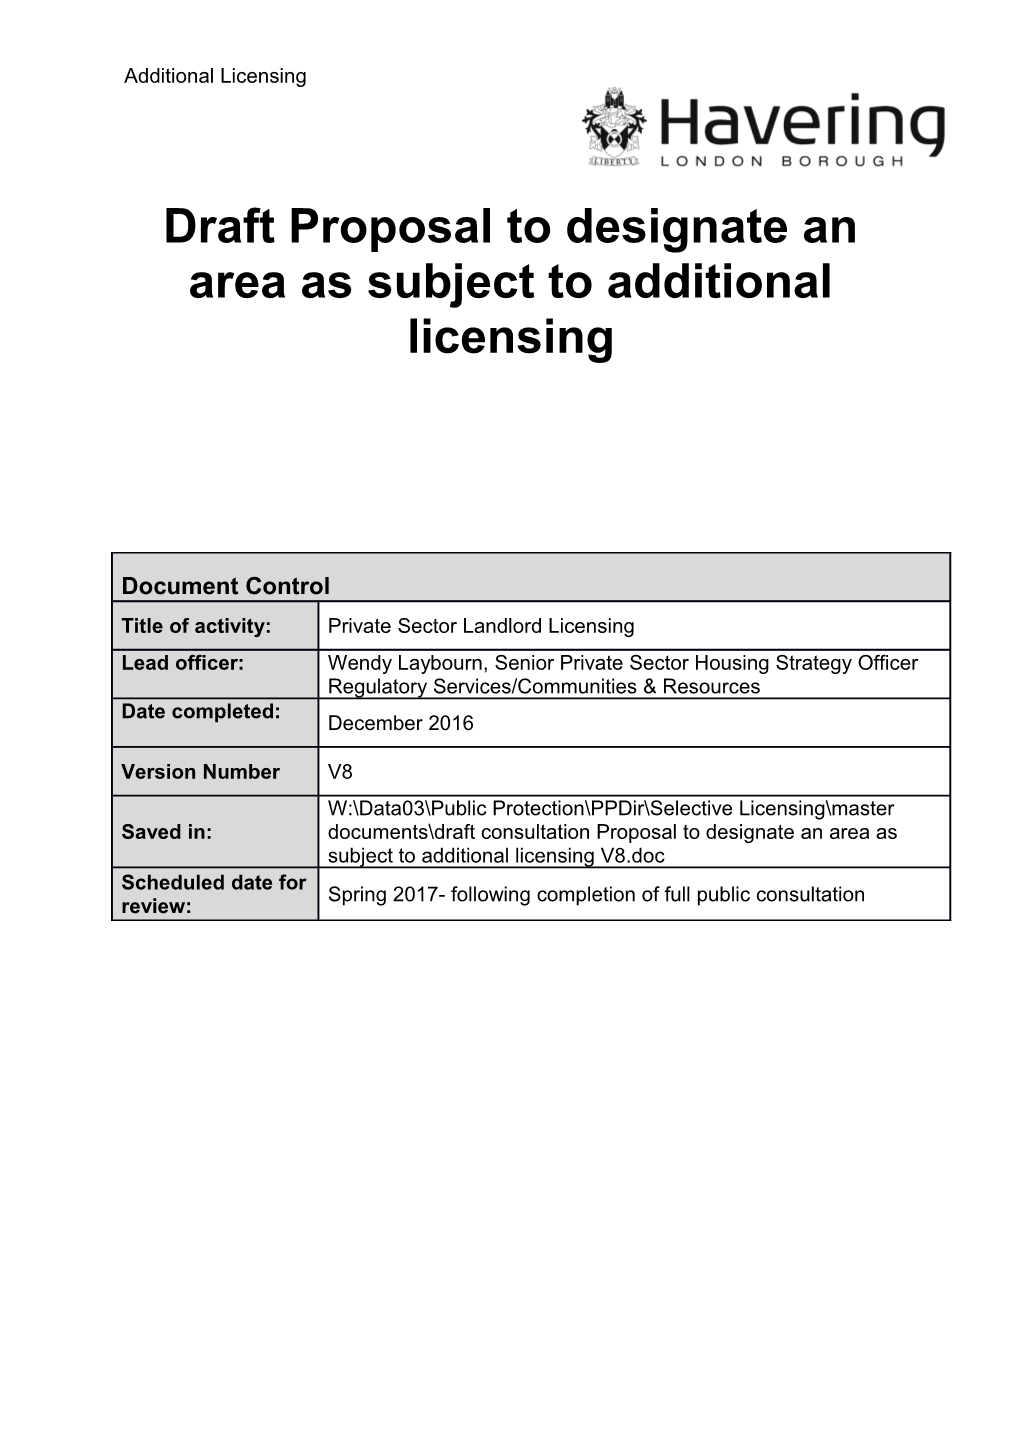 2016 Draft Additional Licensing Consultation